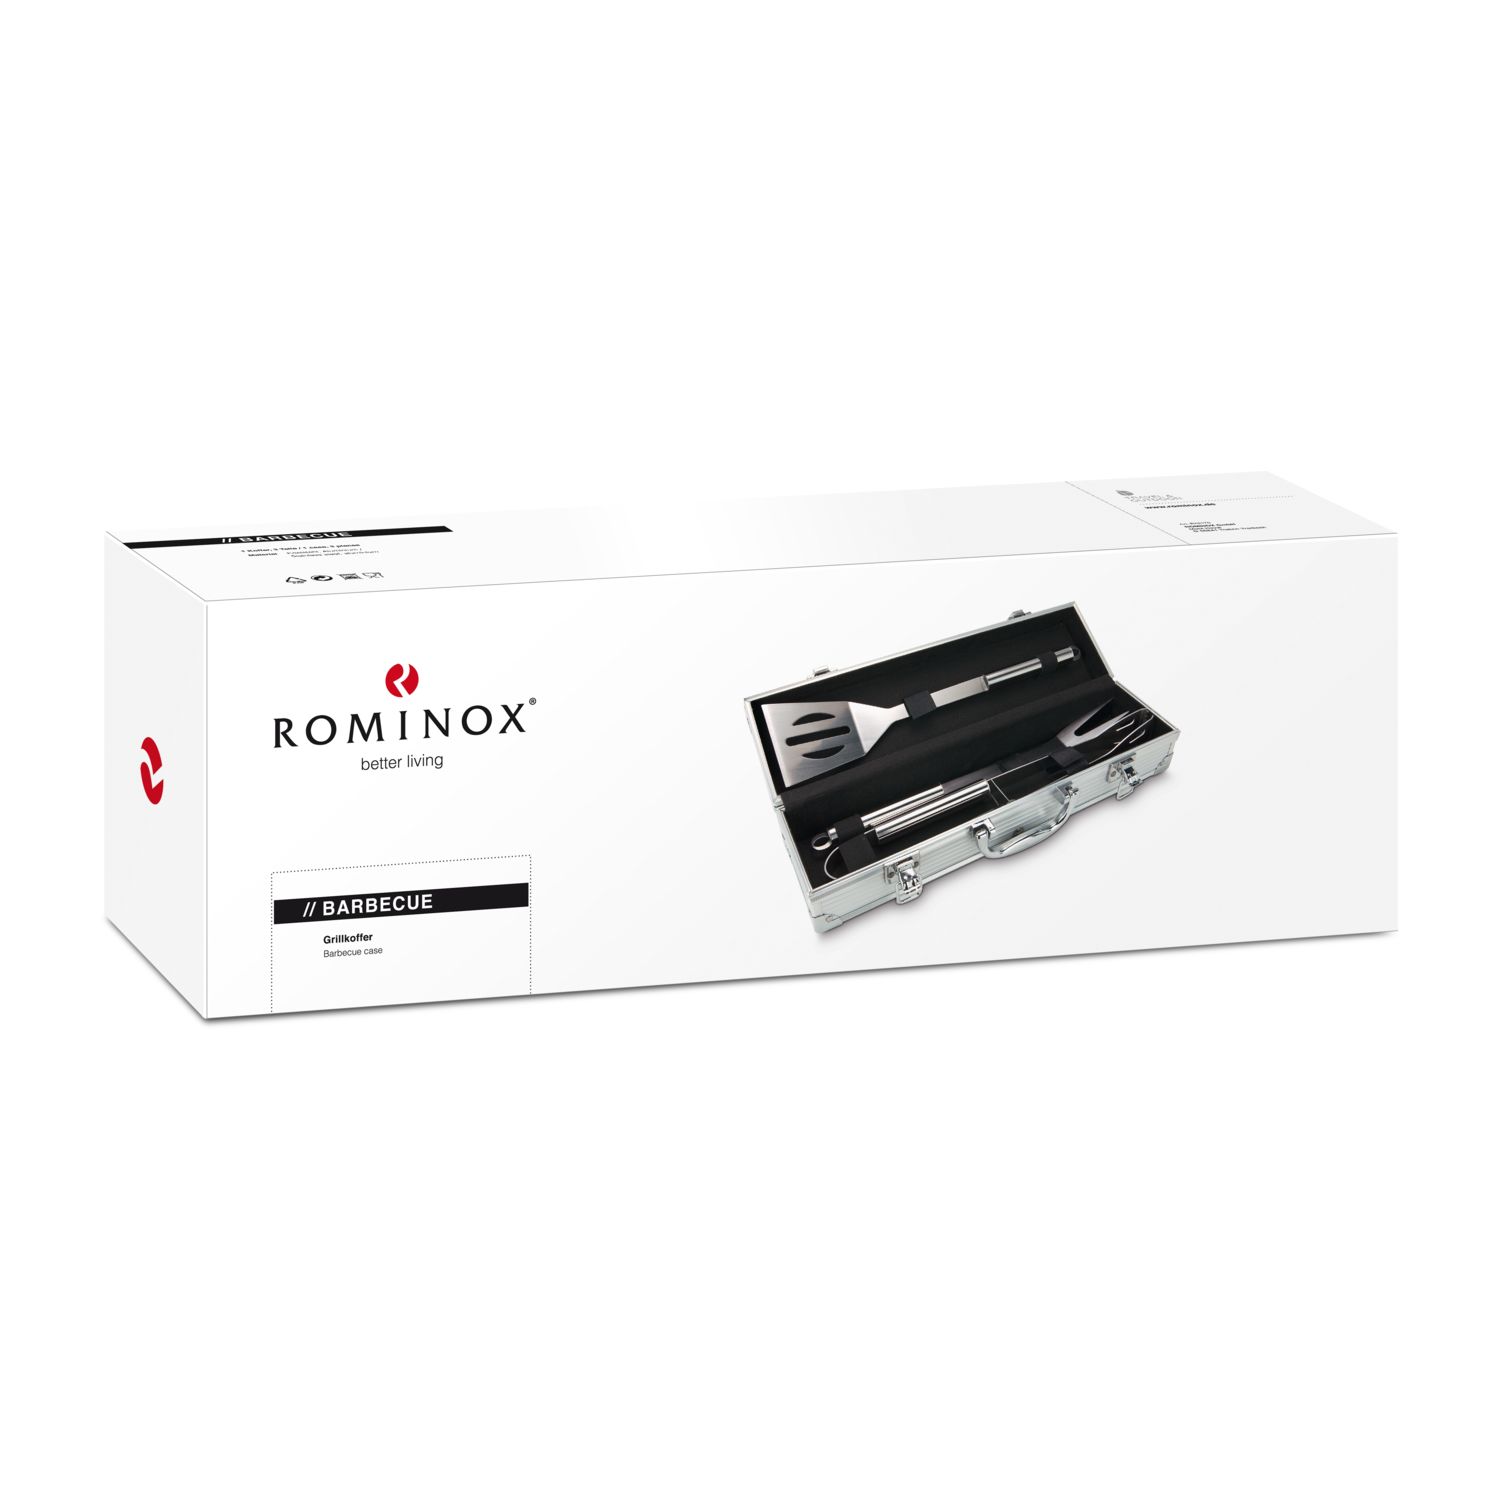 ROMINOX® Grillkoffer // Barbecue